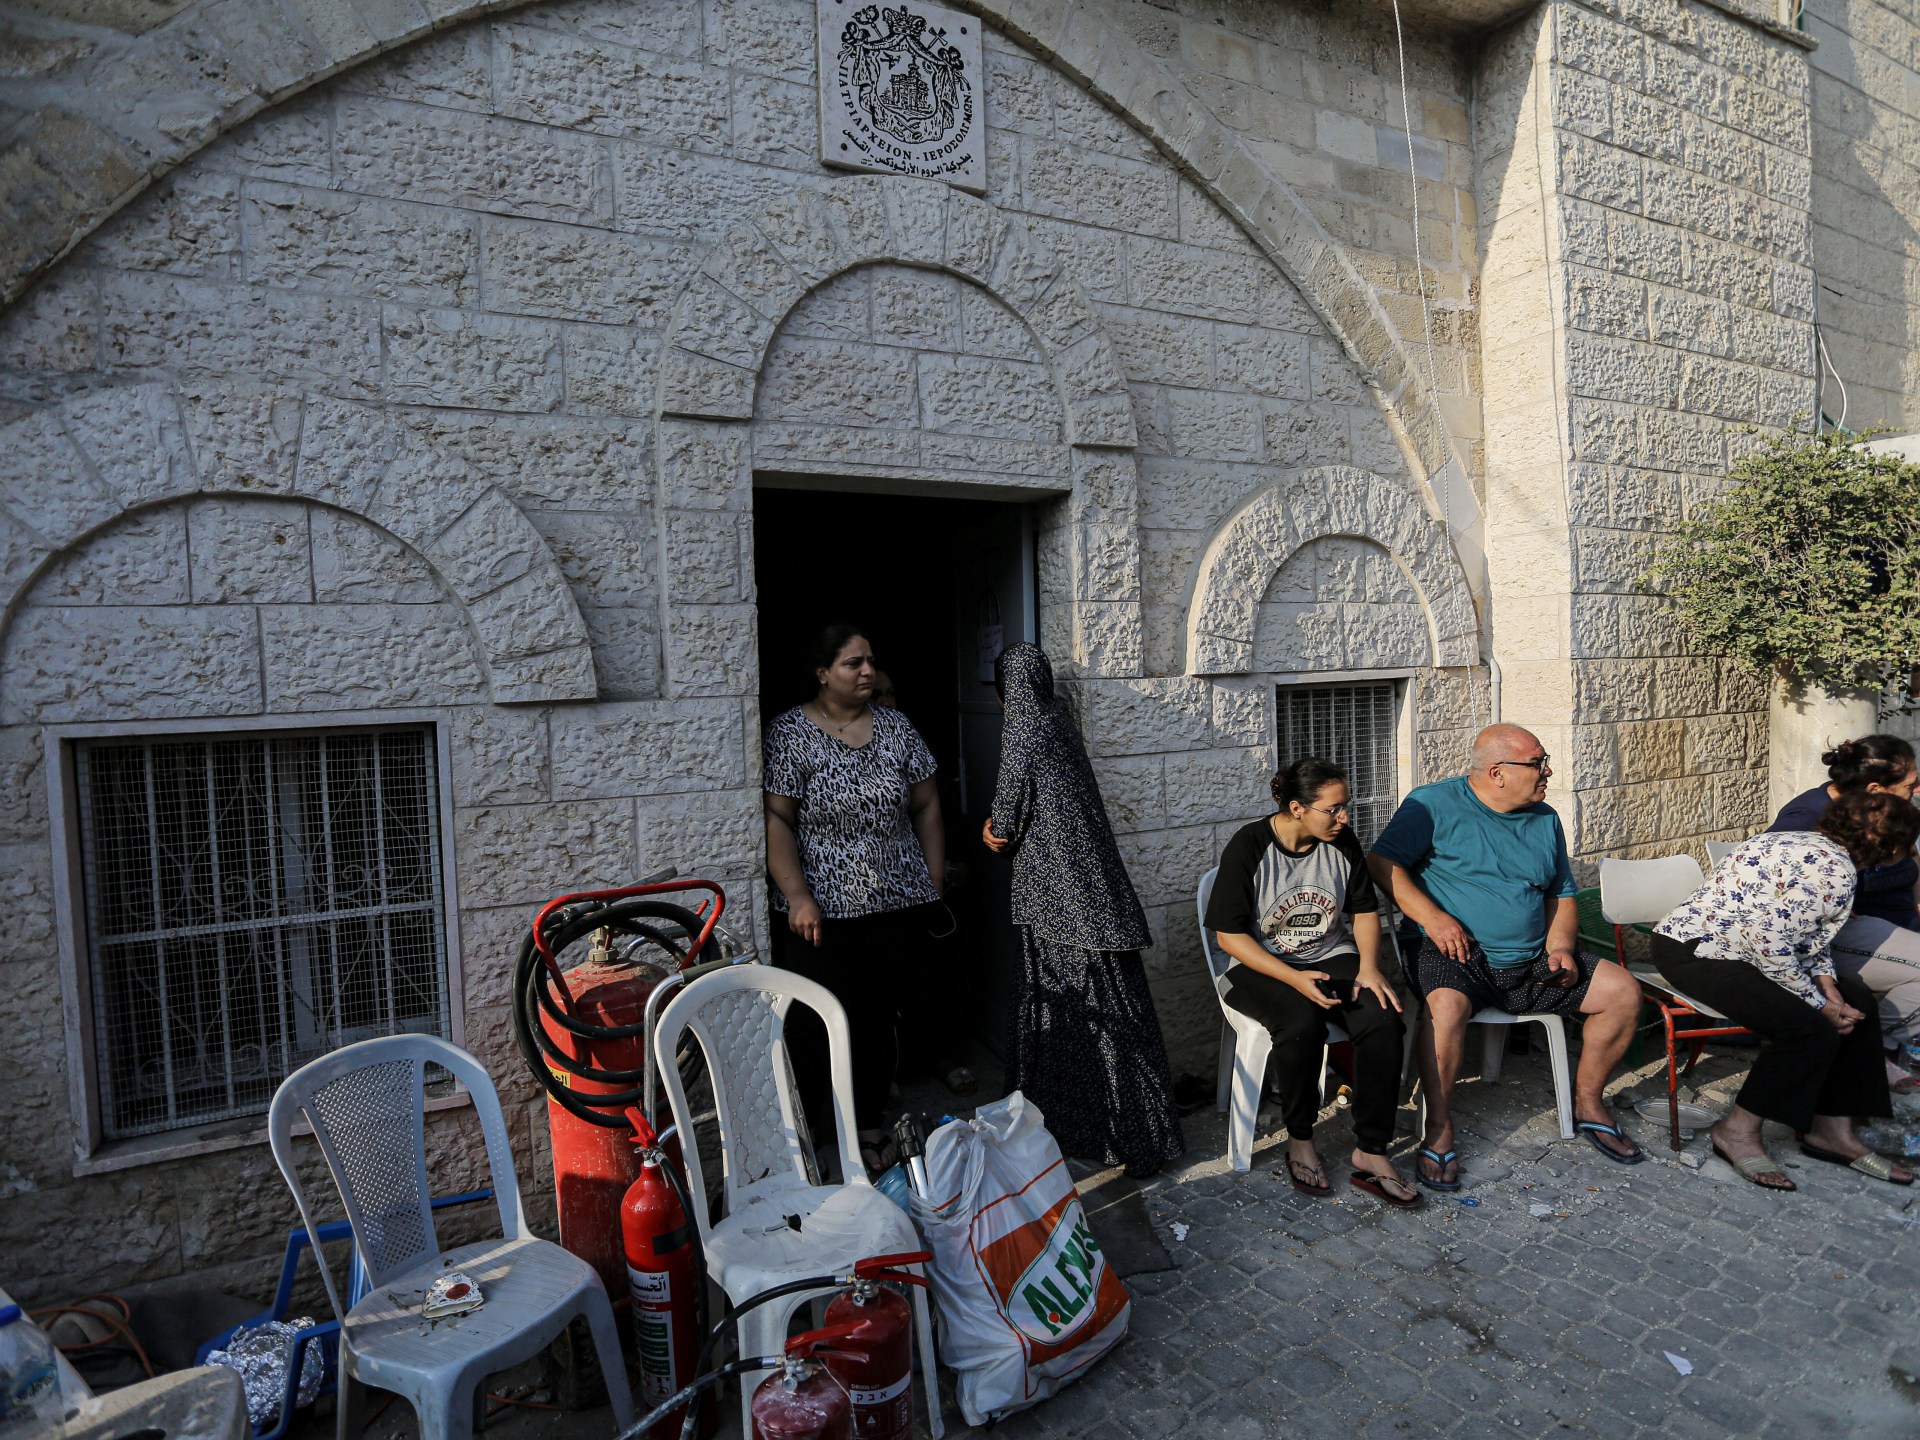 Israeli forces kill two Christian women in ‘cold blood’ inside Gaza church | Israel-Palestine conflict News